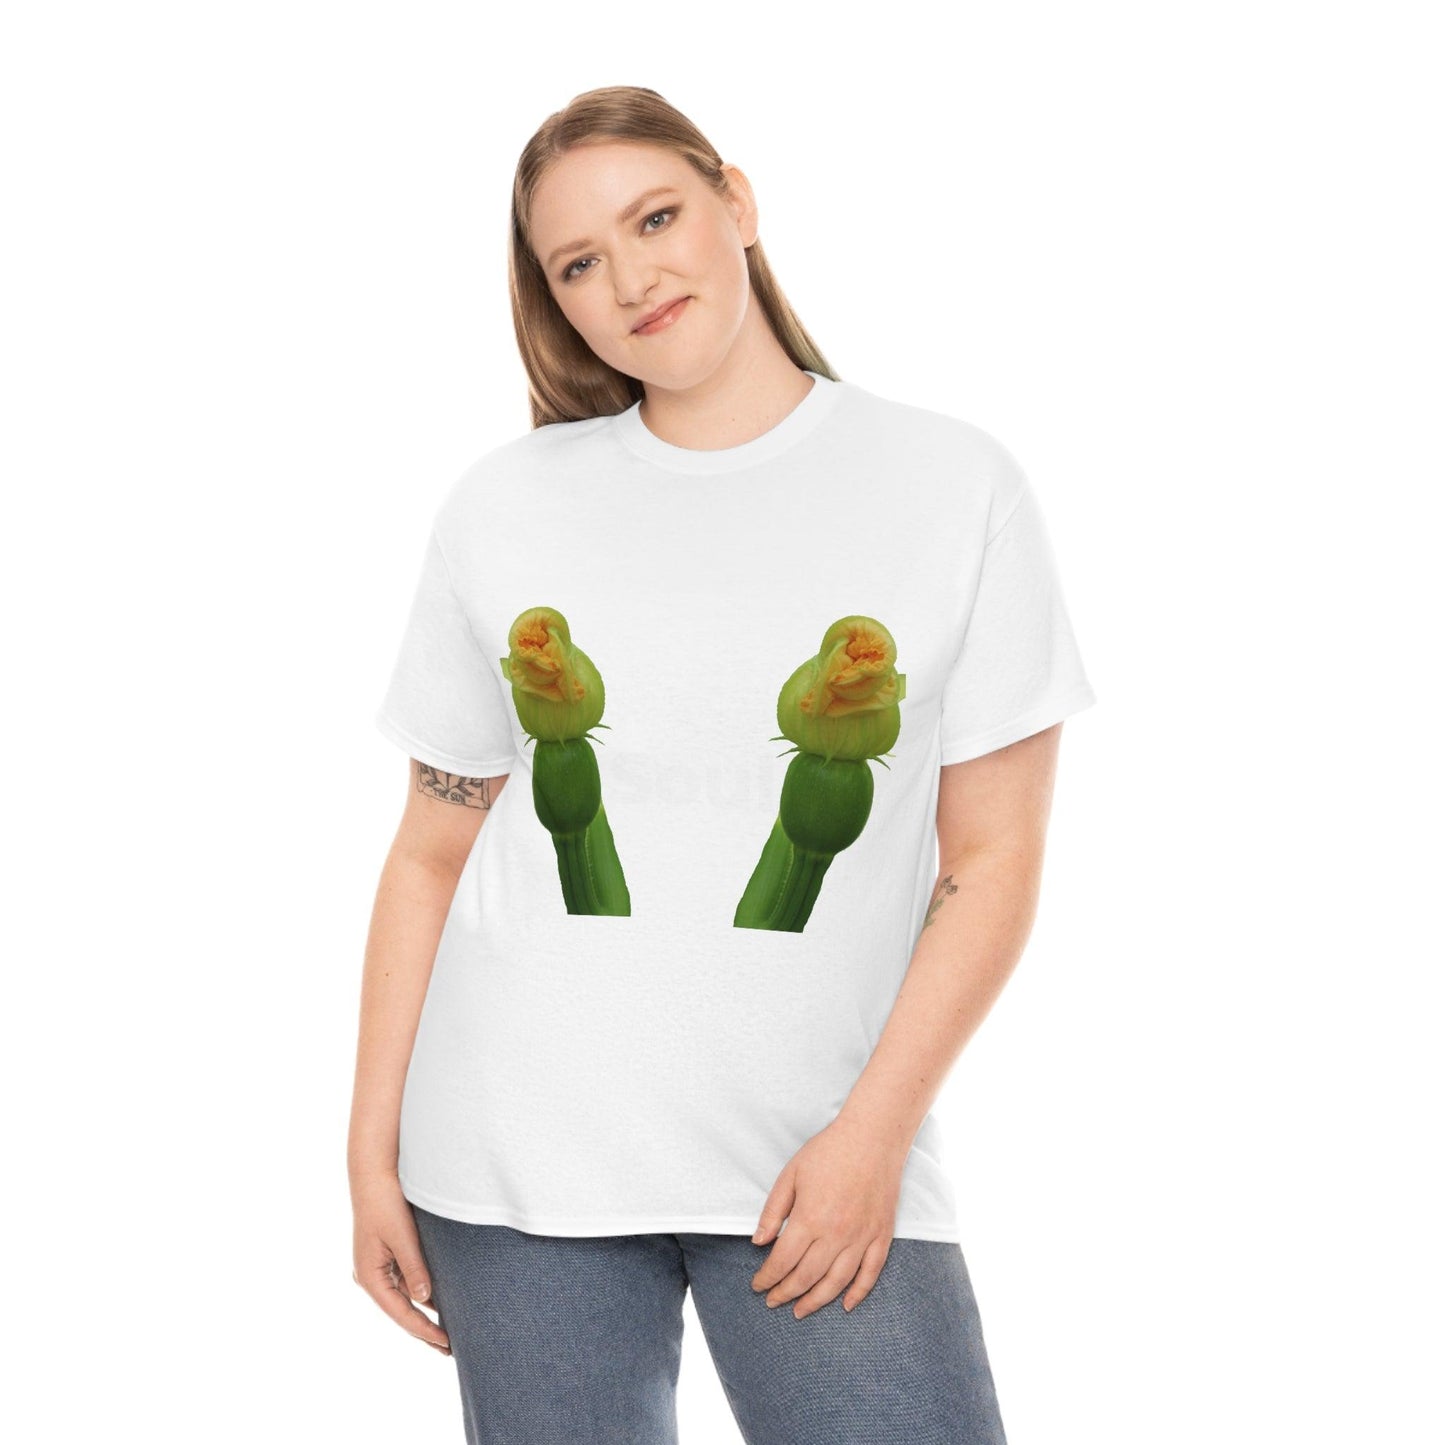 Gardening is good for the soul Tee